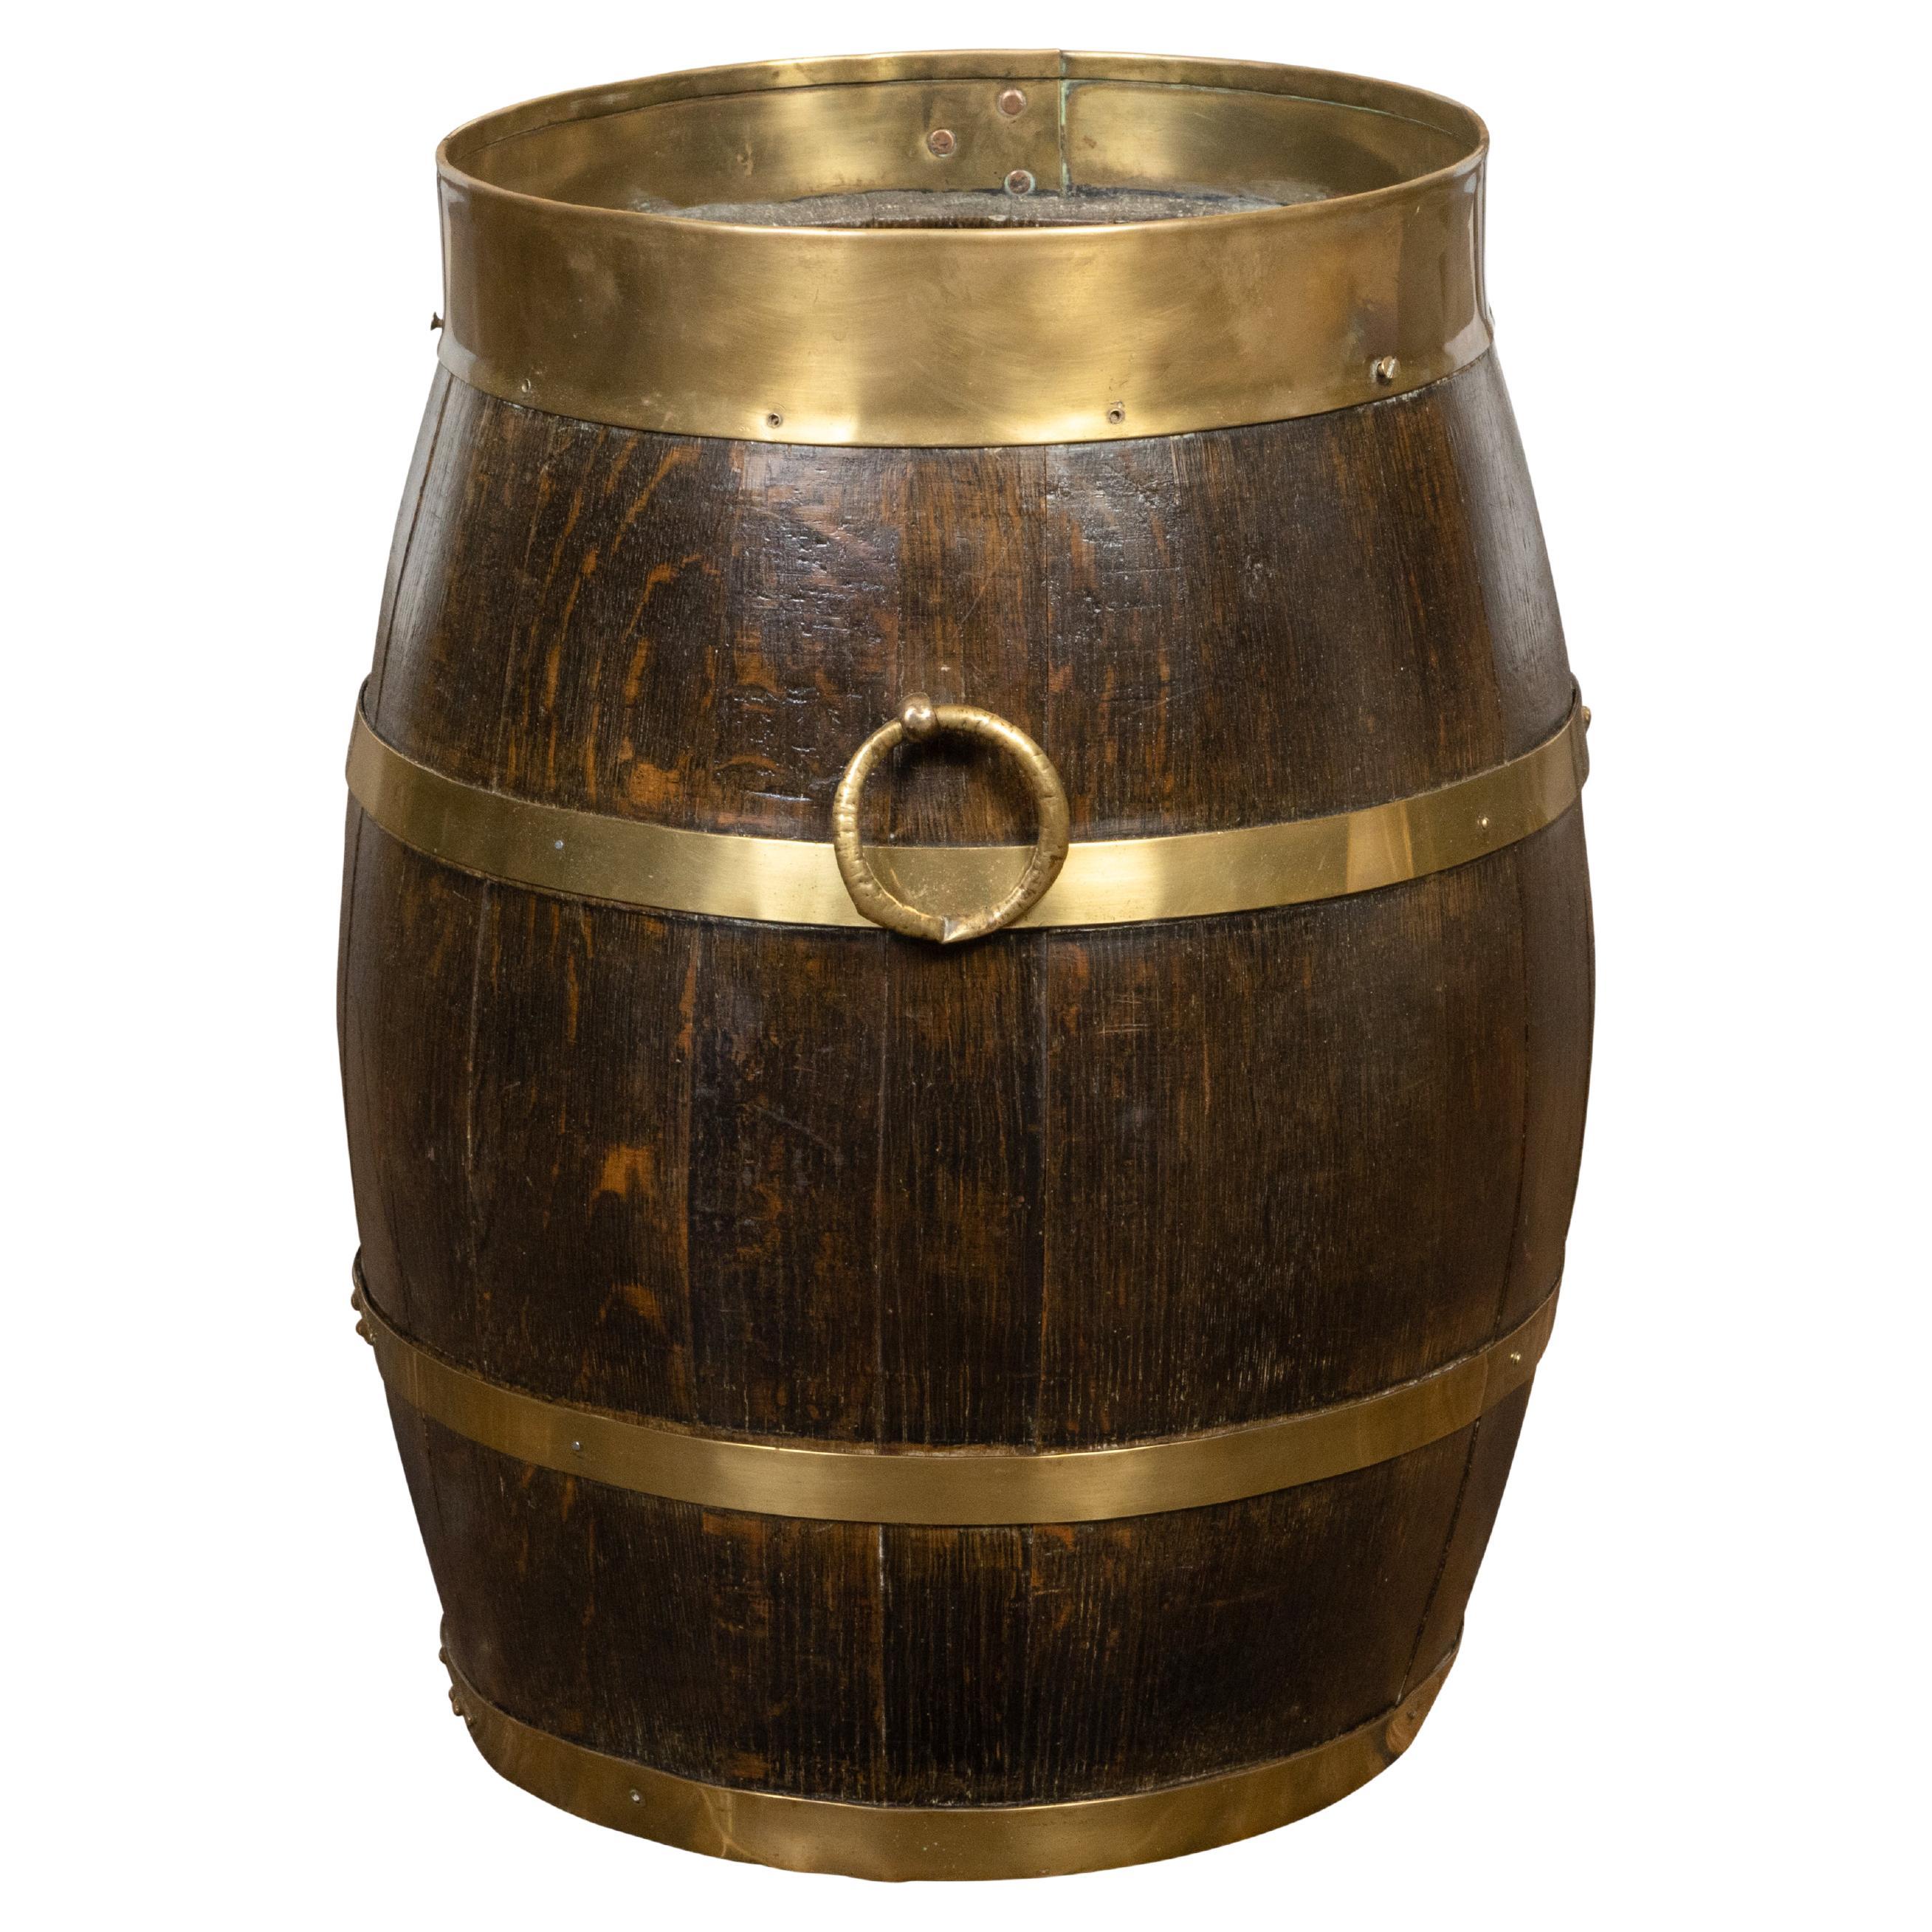 English Turn of the Century Oak Barrel with Brass Braces, circa 1900 For Sale